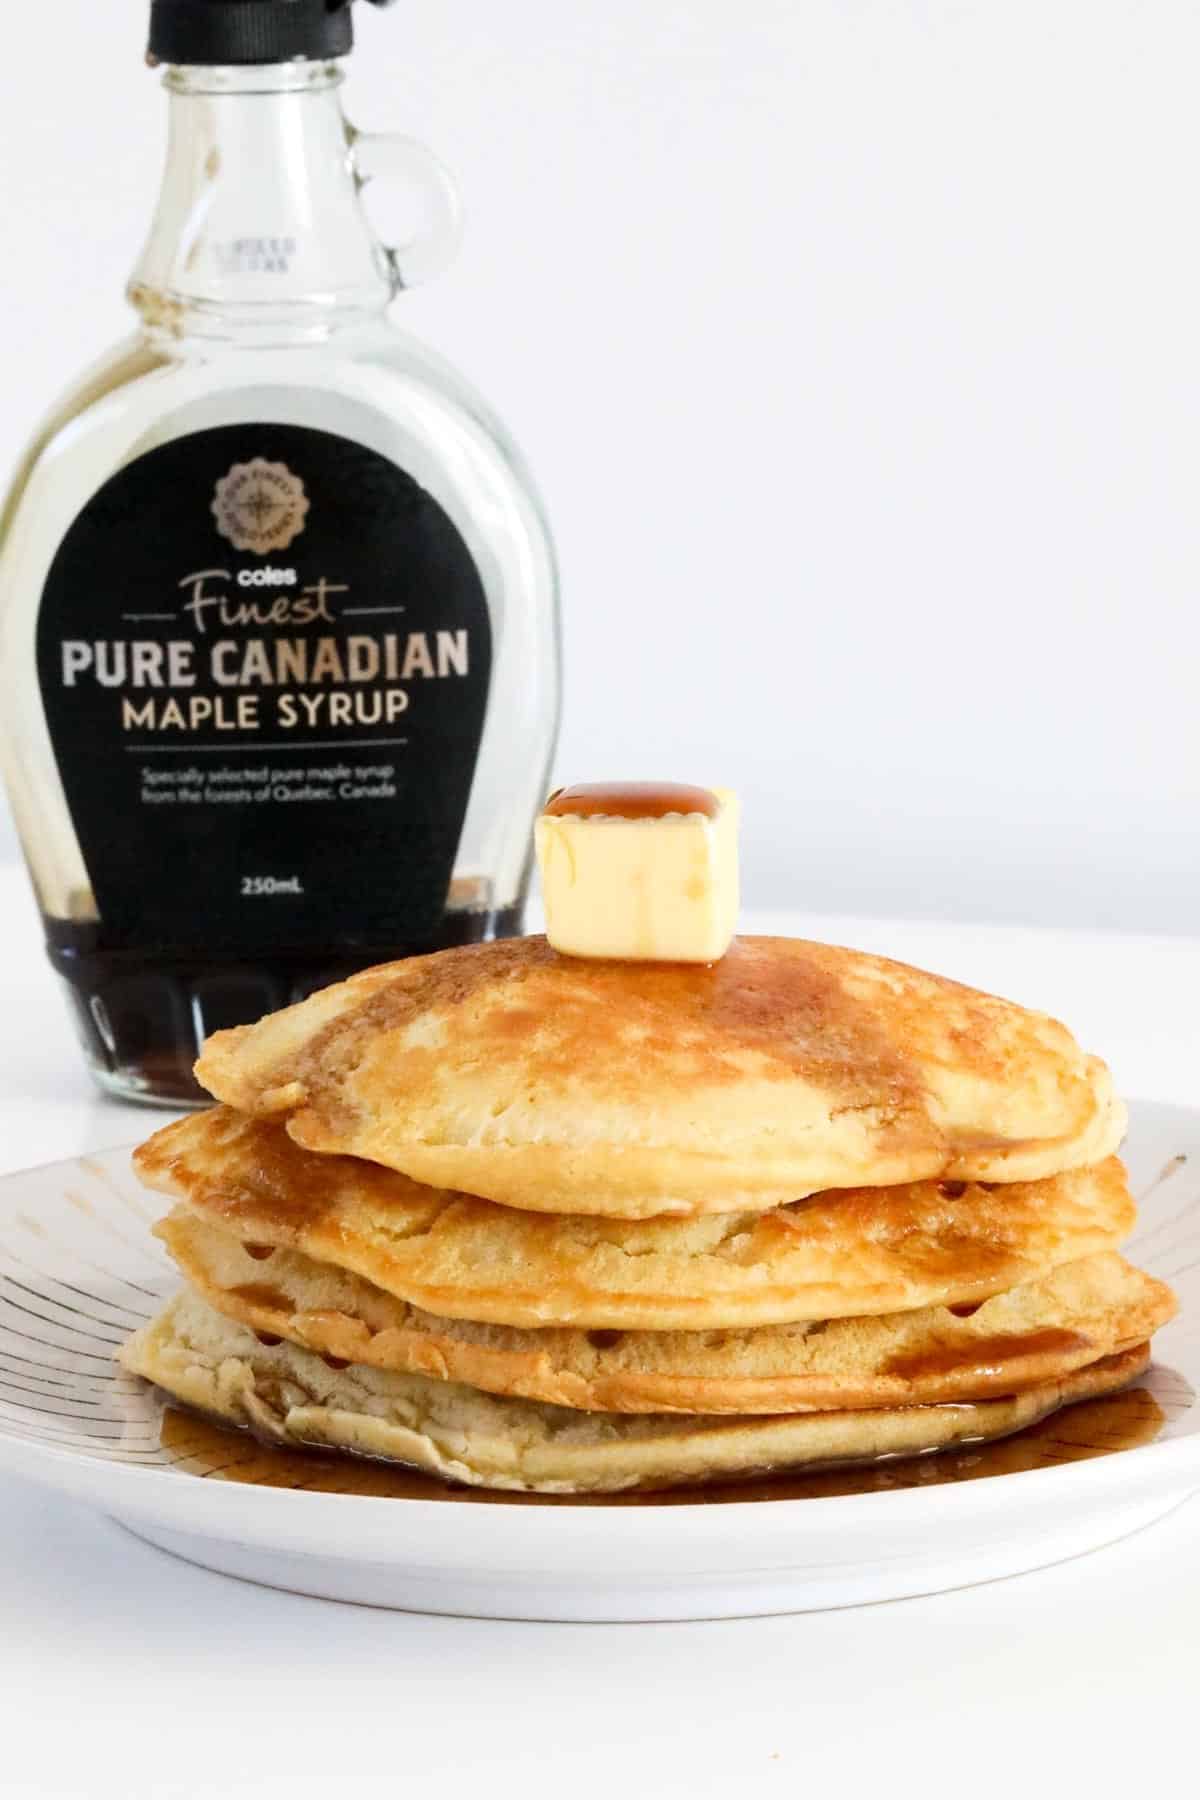 A jar of maple syrup behind a stack of pancakes.